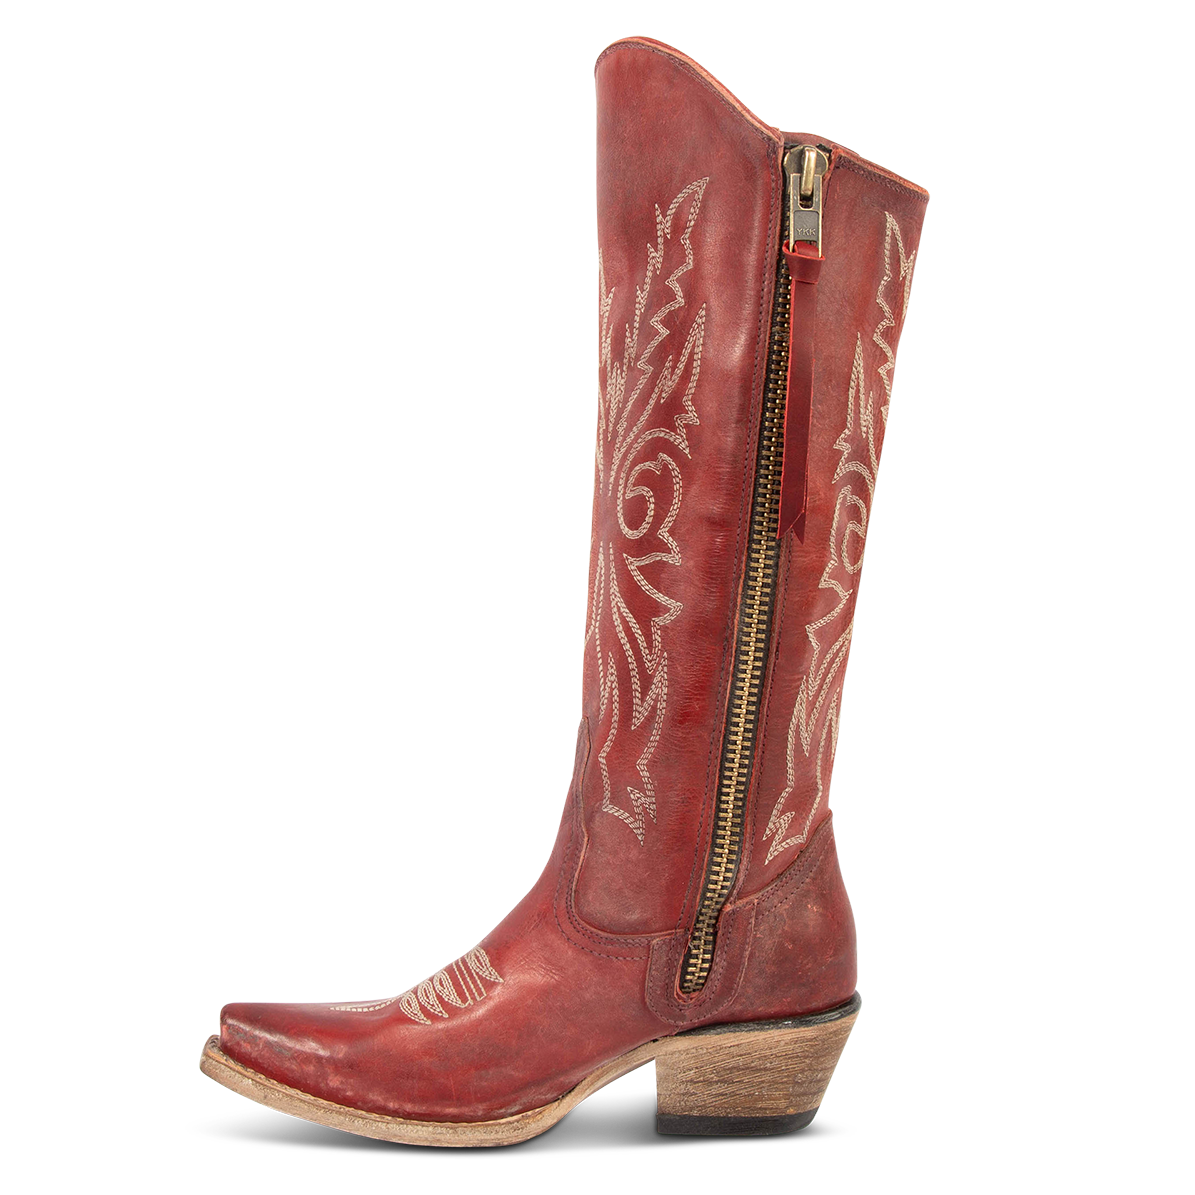 Inside view showing inside zip closure on FREEBIRD women's Wolfgang red tall western boot